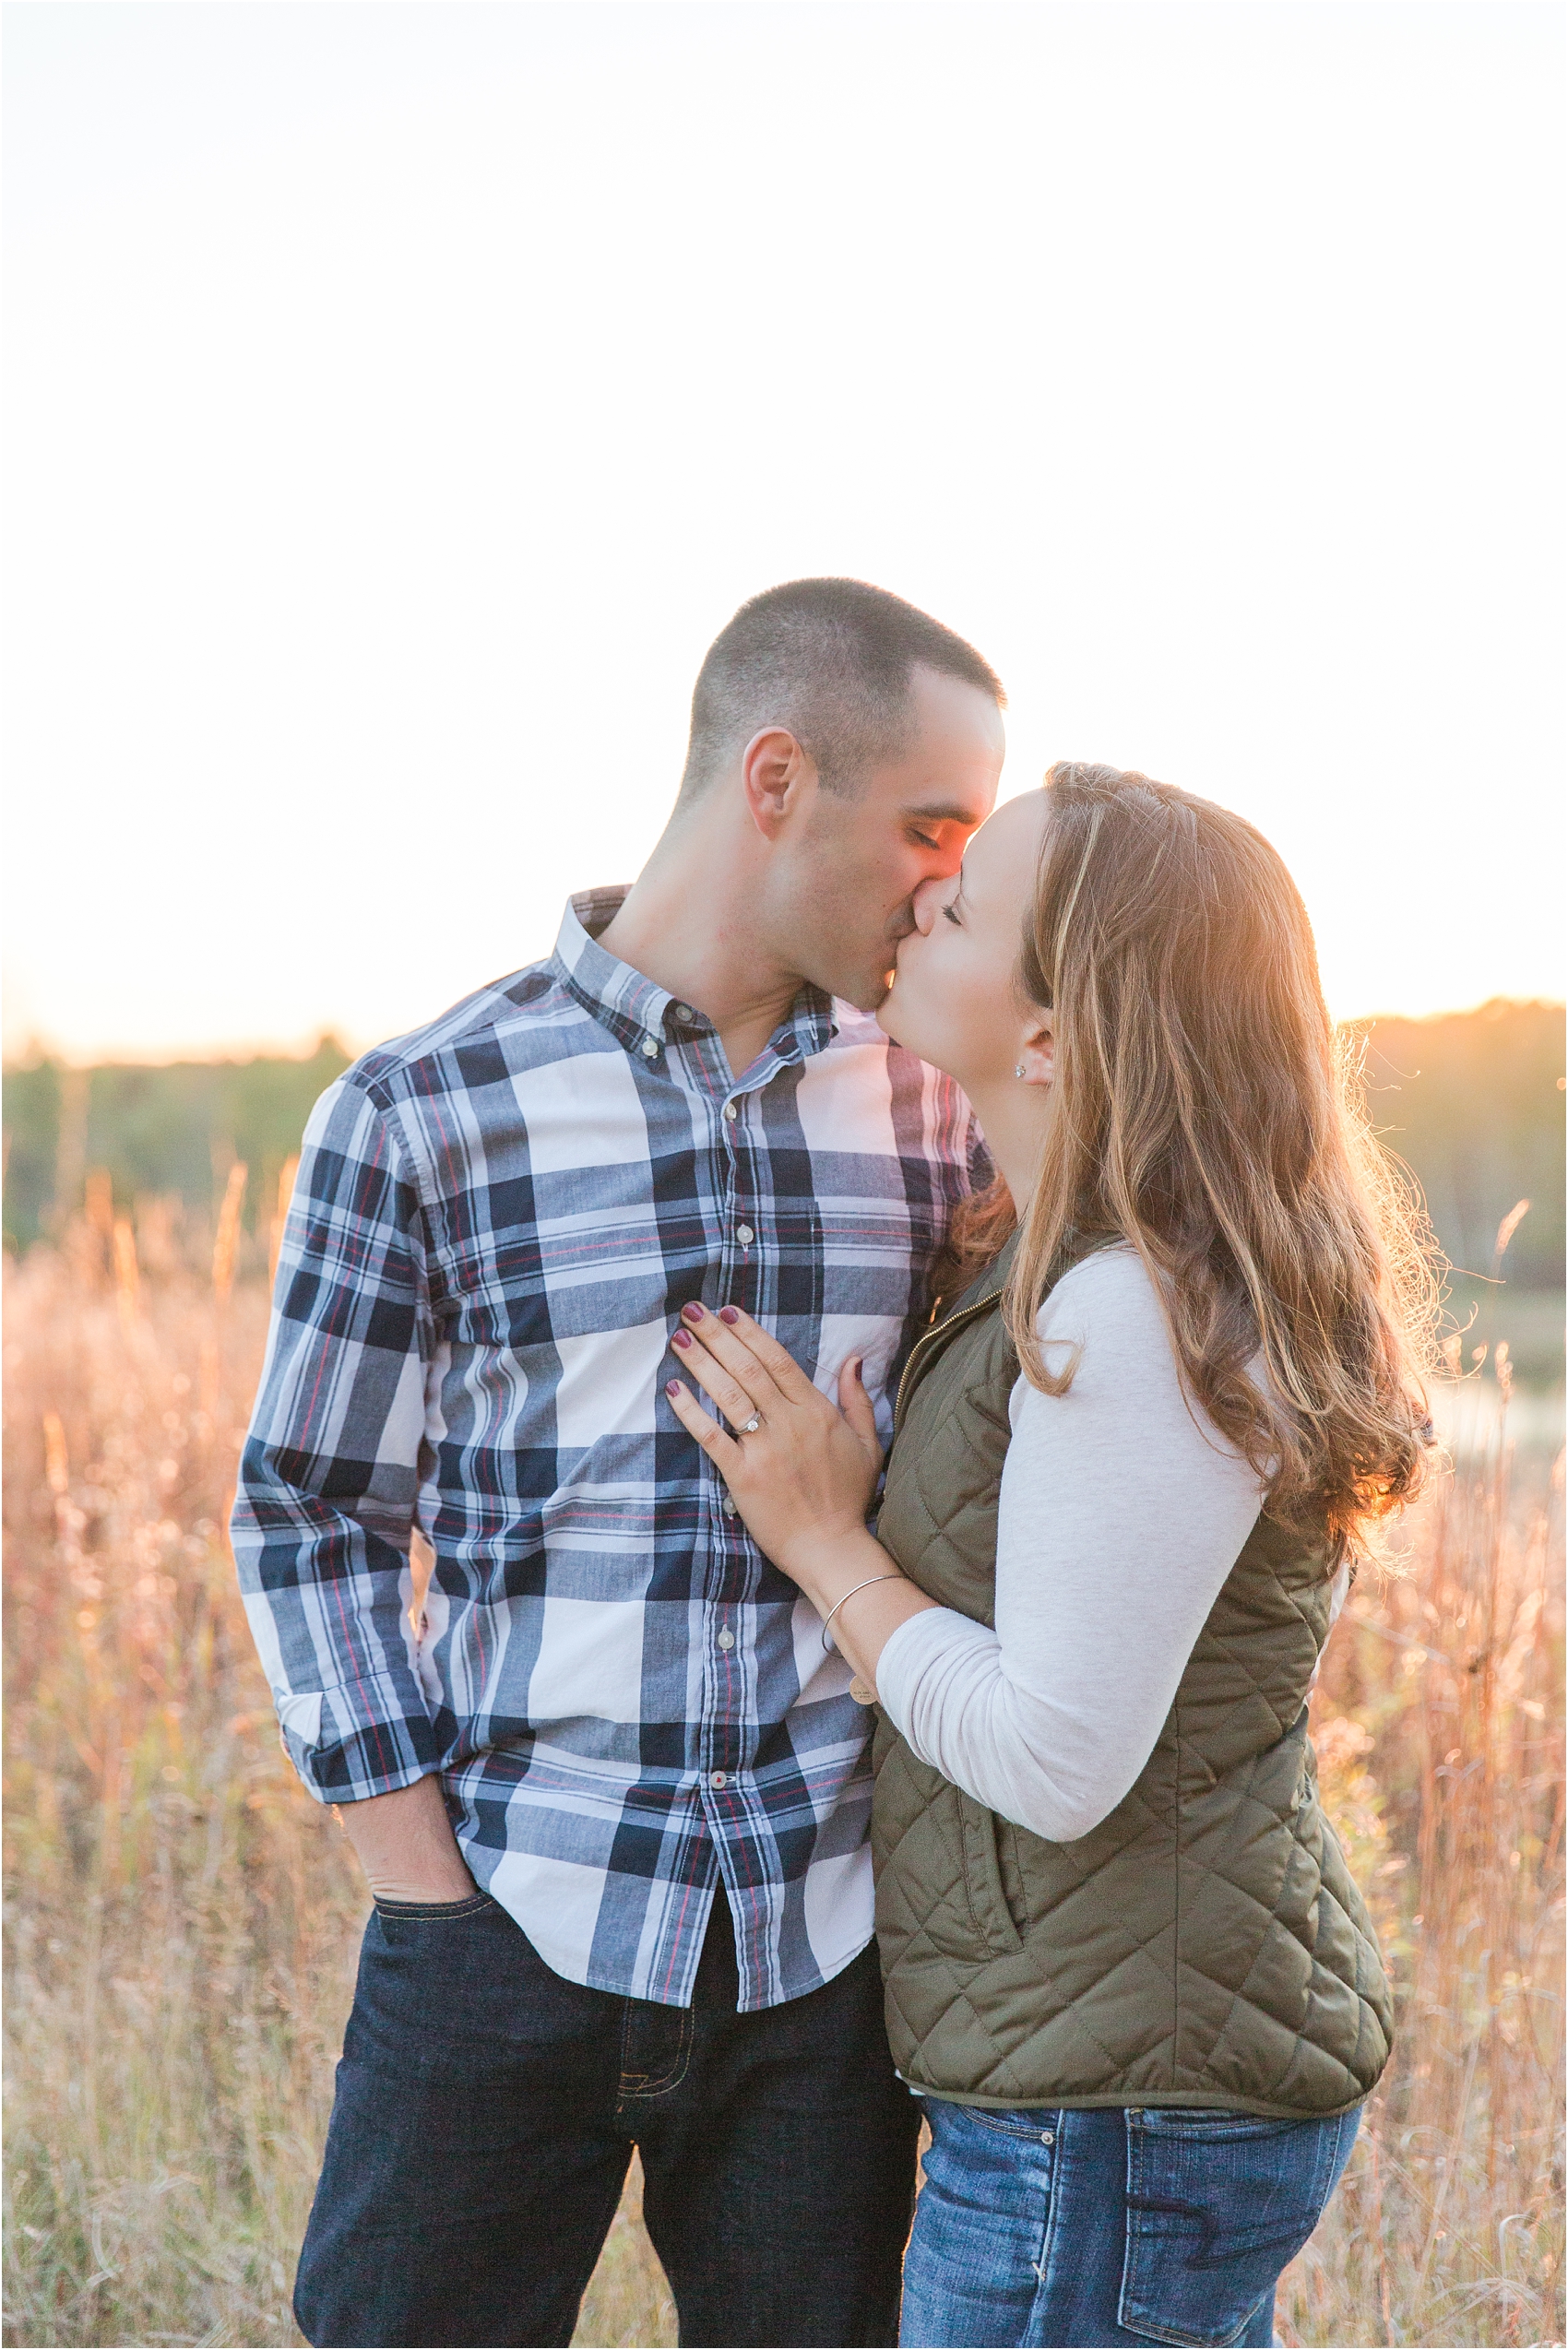 romantic-fall-engagement-photos-at-indian-springs-metropark-in-clarkston-mi-by-courtney-carolyn-photography_0022.jpg